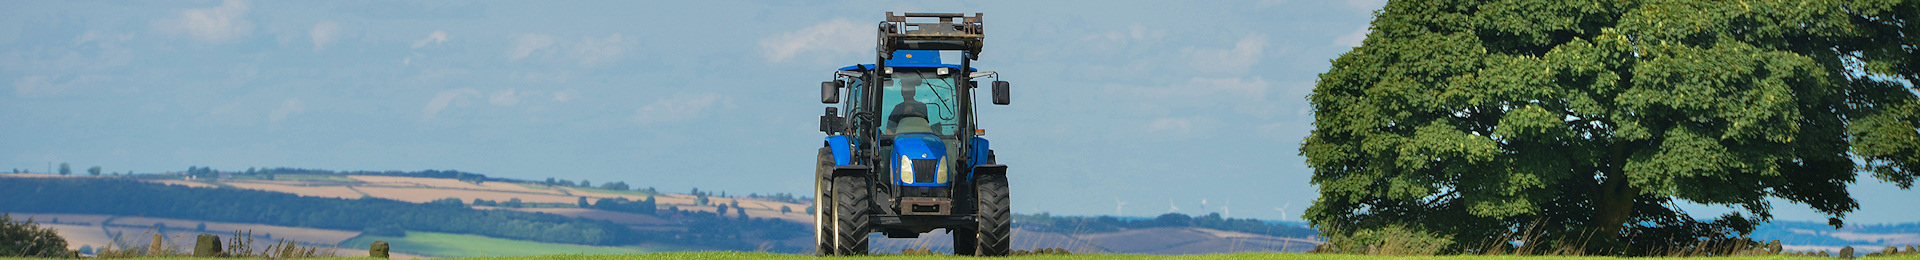 Photograph: Tractor in field.